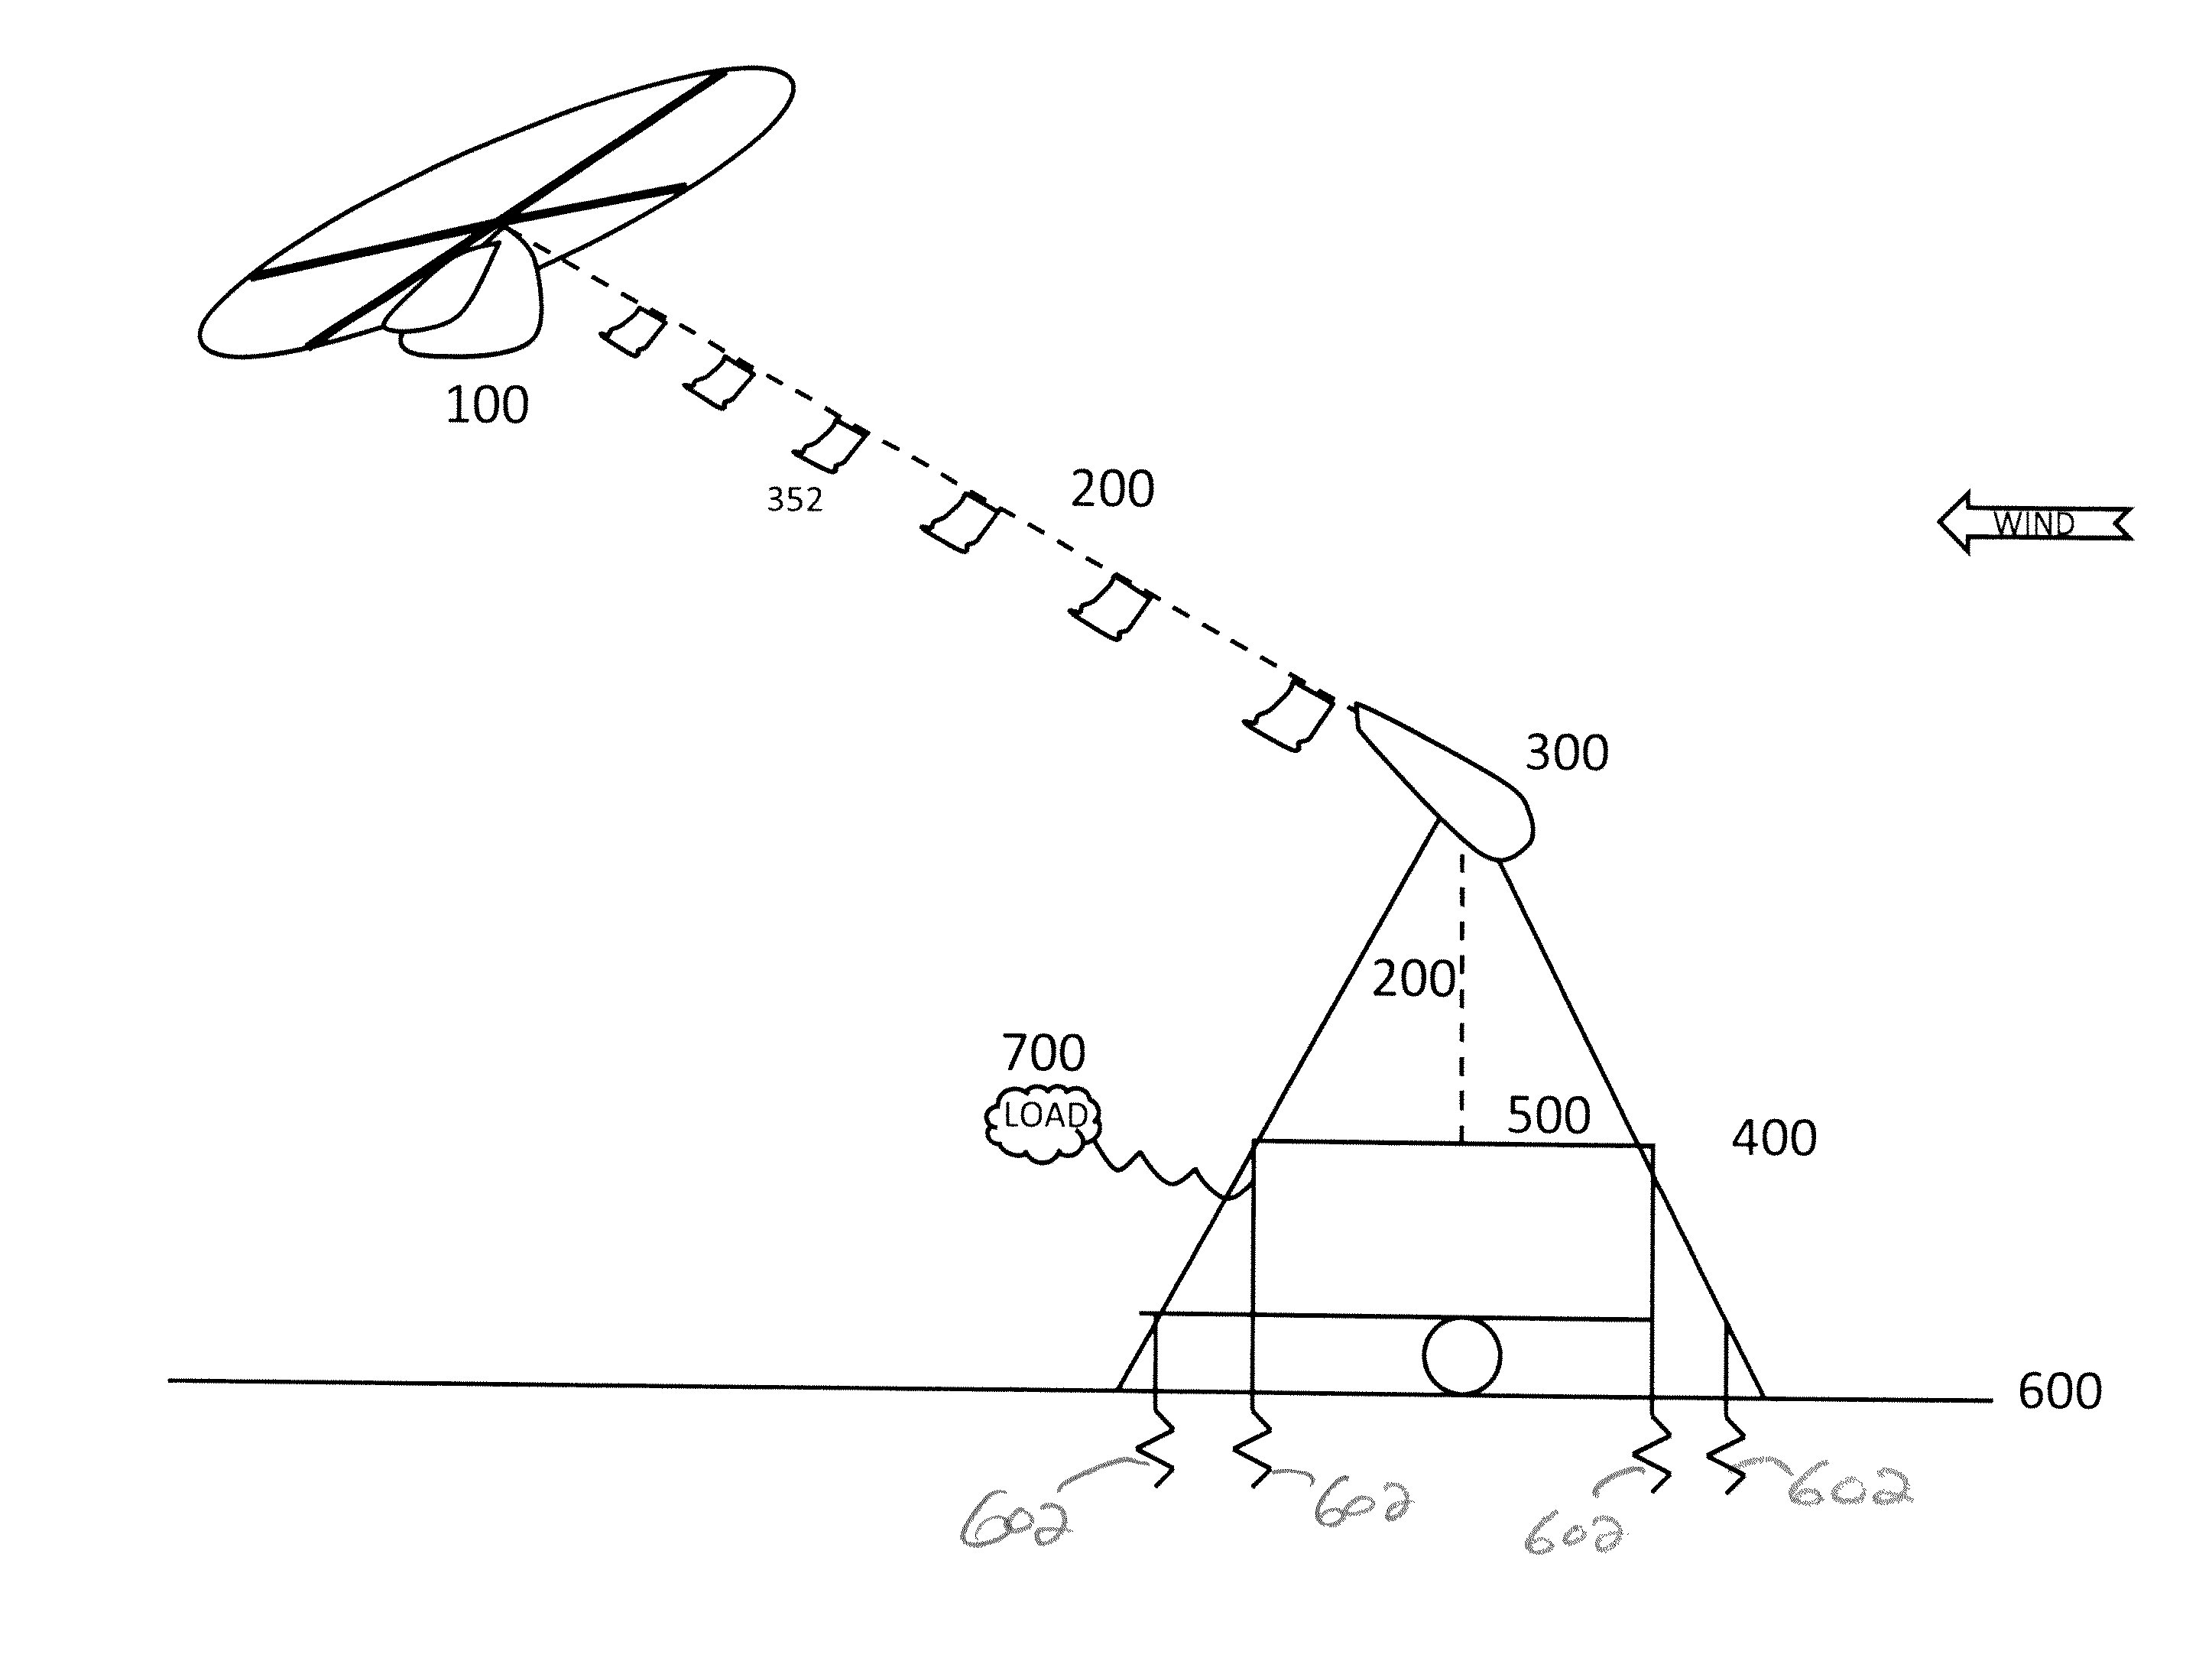 Tethered glider system for power generation